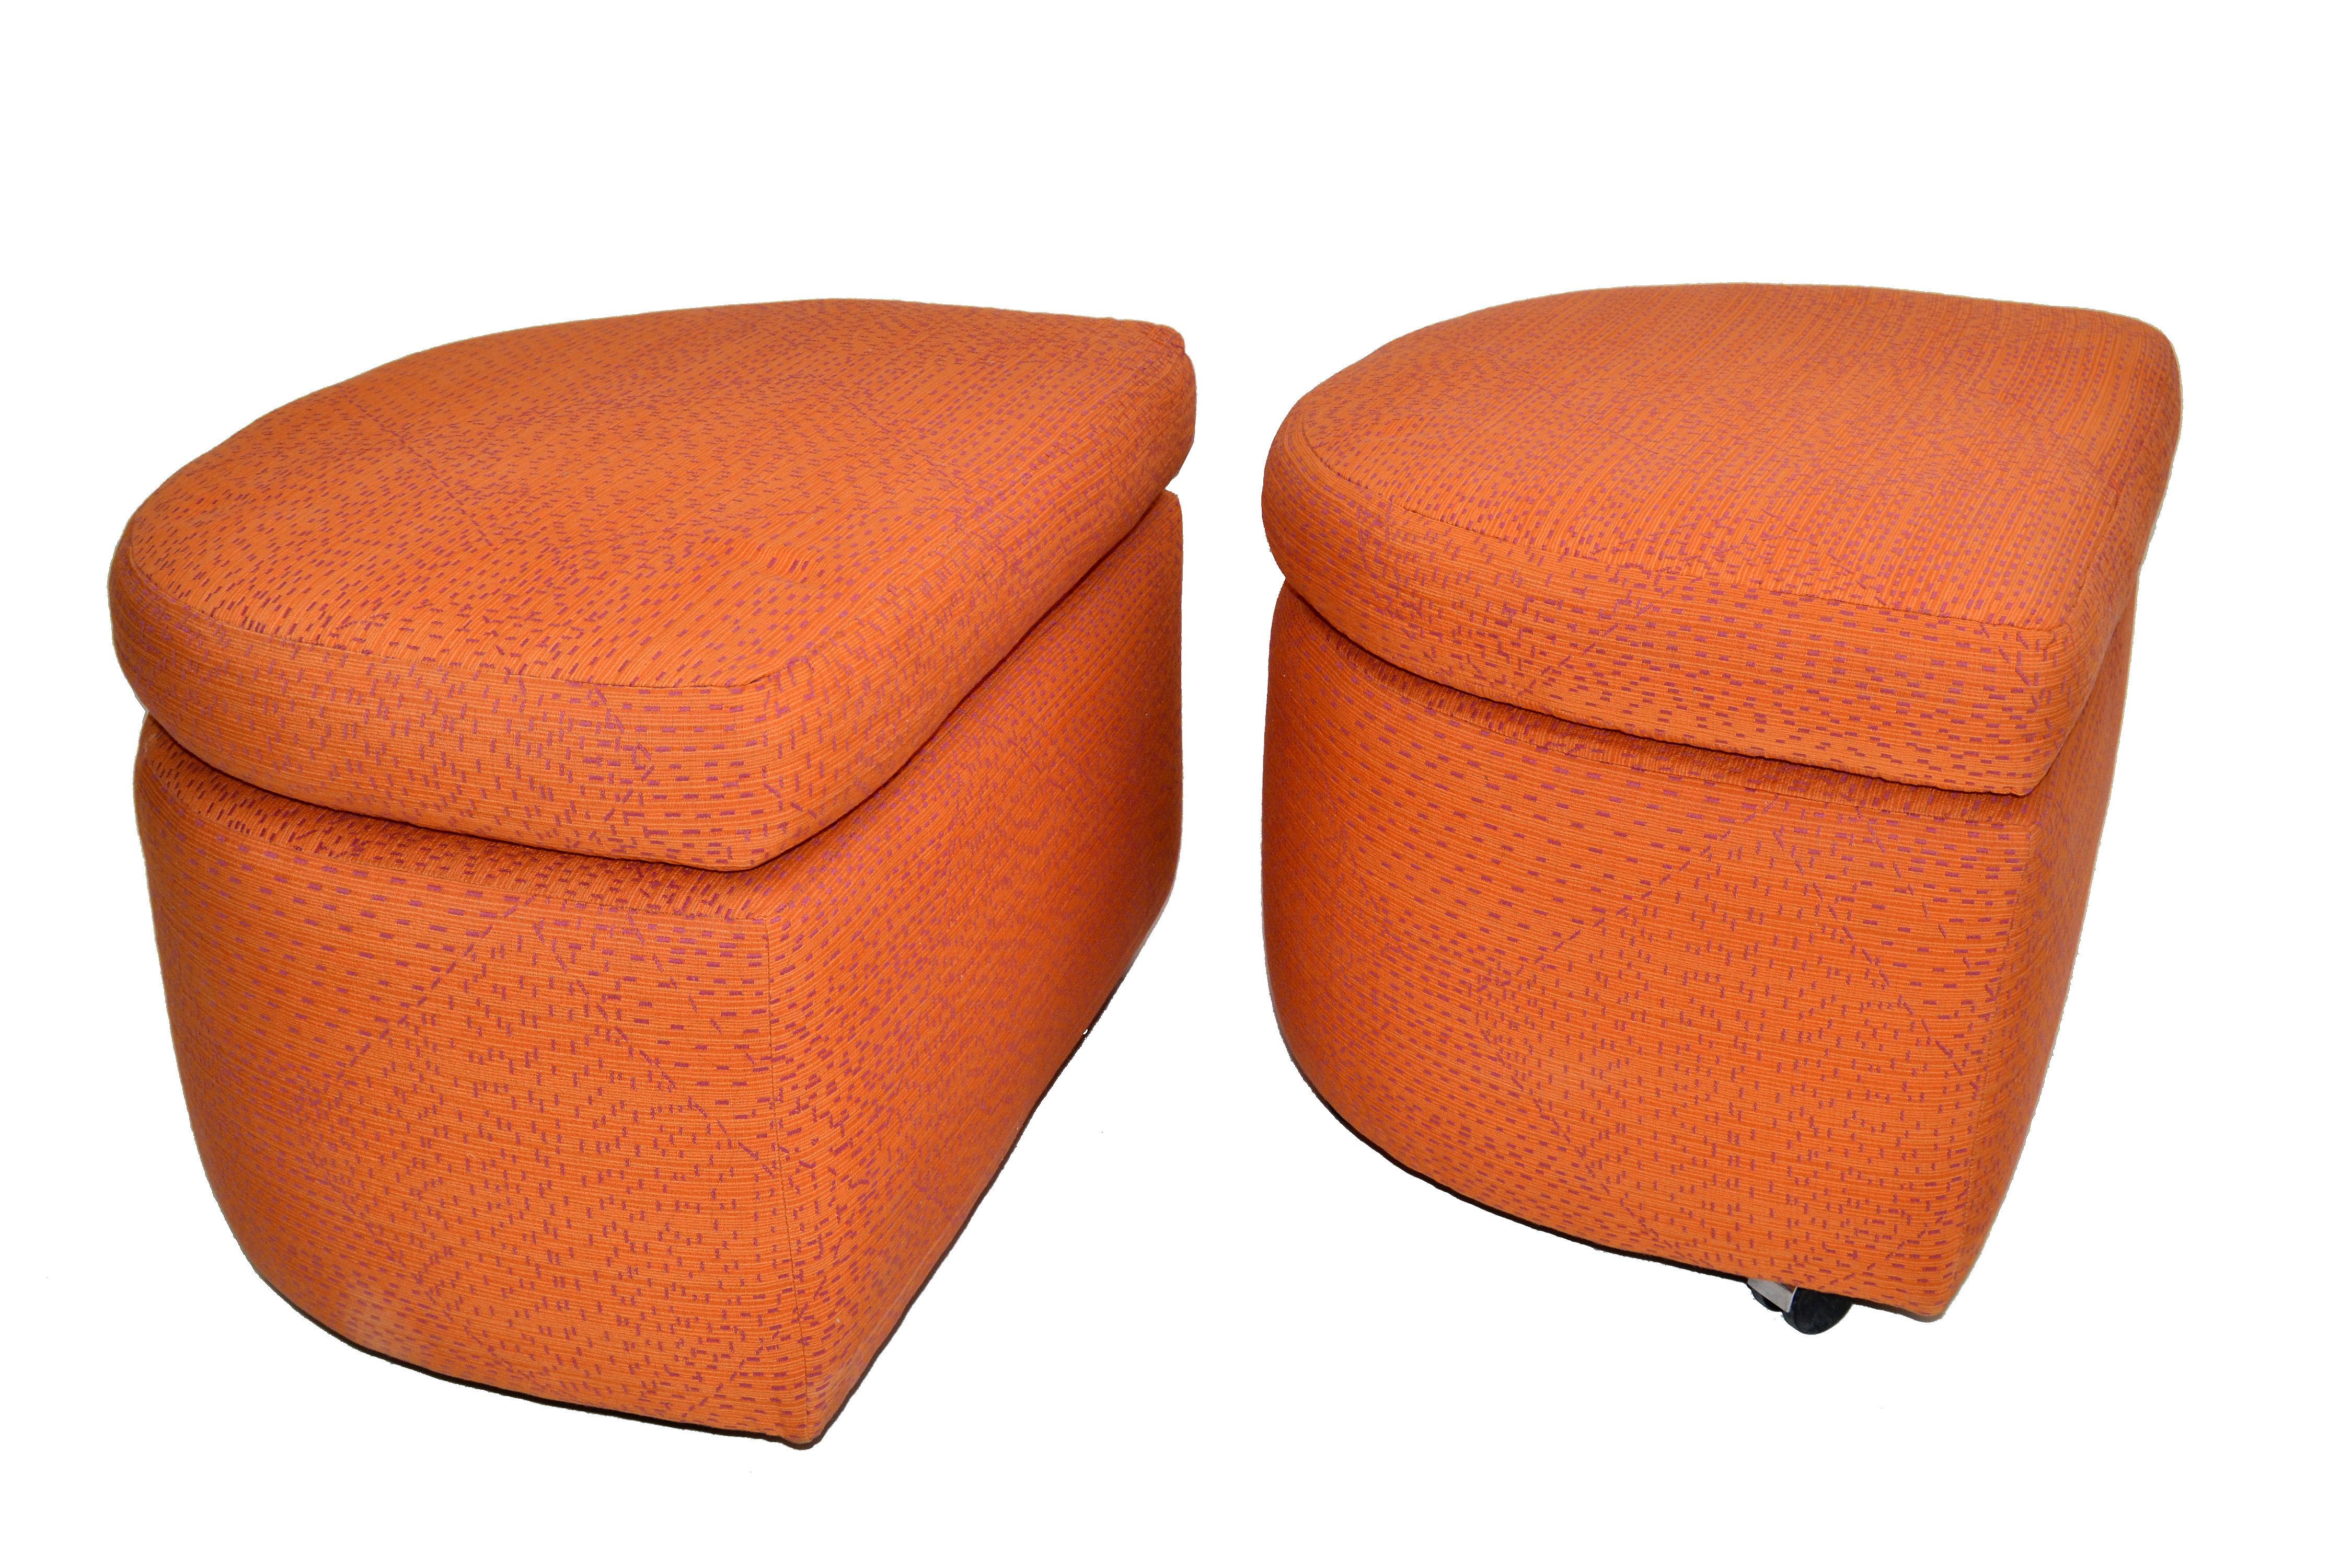 Plastic Mid-Century Modern Orange Cotton Upholstery Ottoman on Casters & Cushions - Pair For Sale